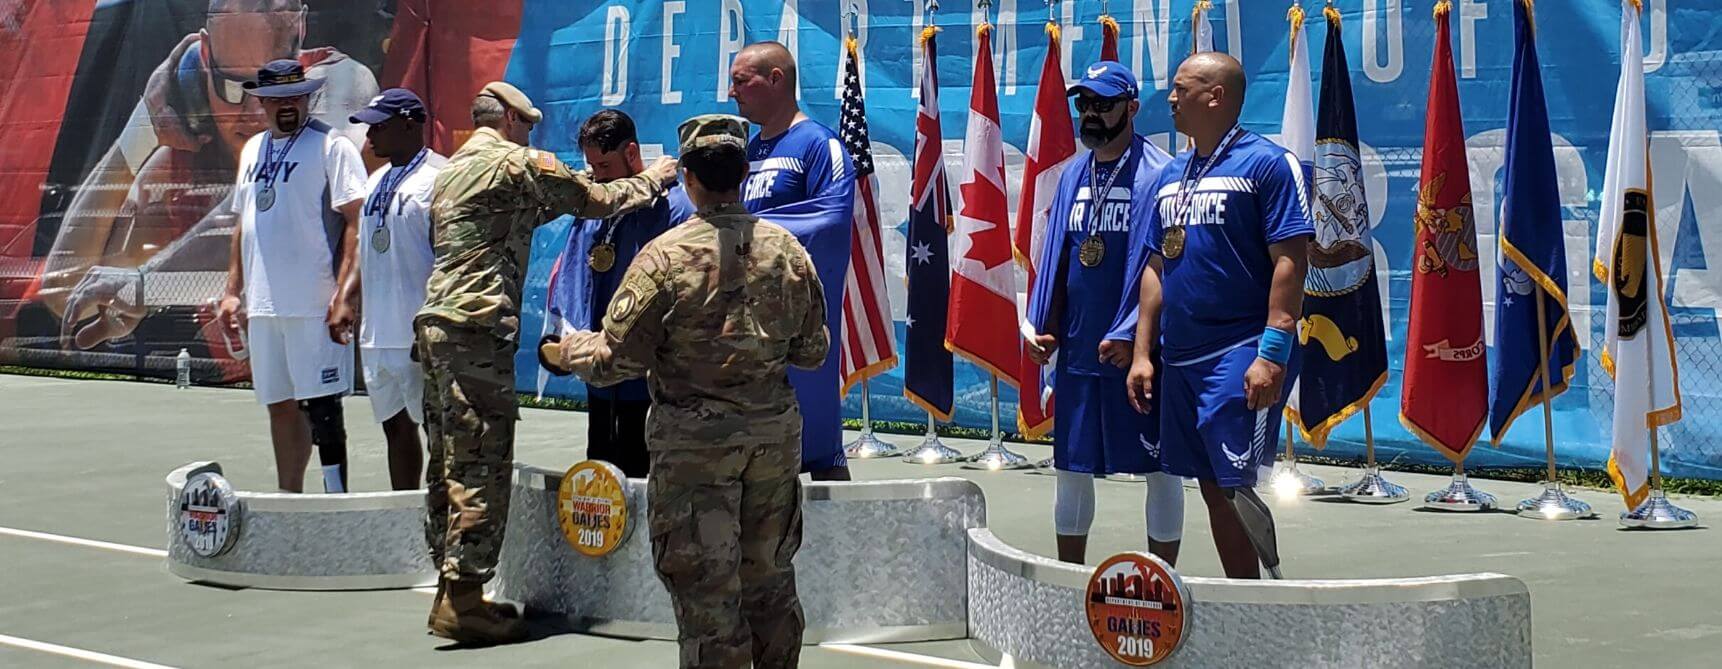 6 Warrior Games Sporting Event for DOD